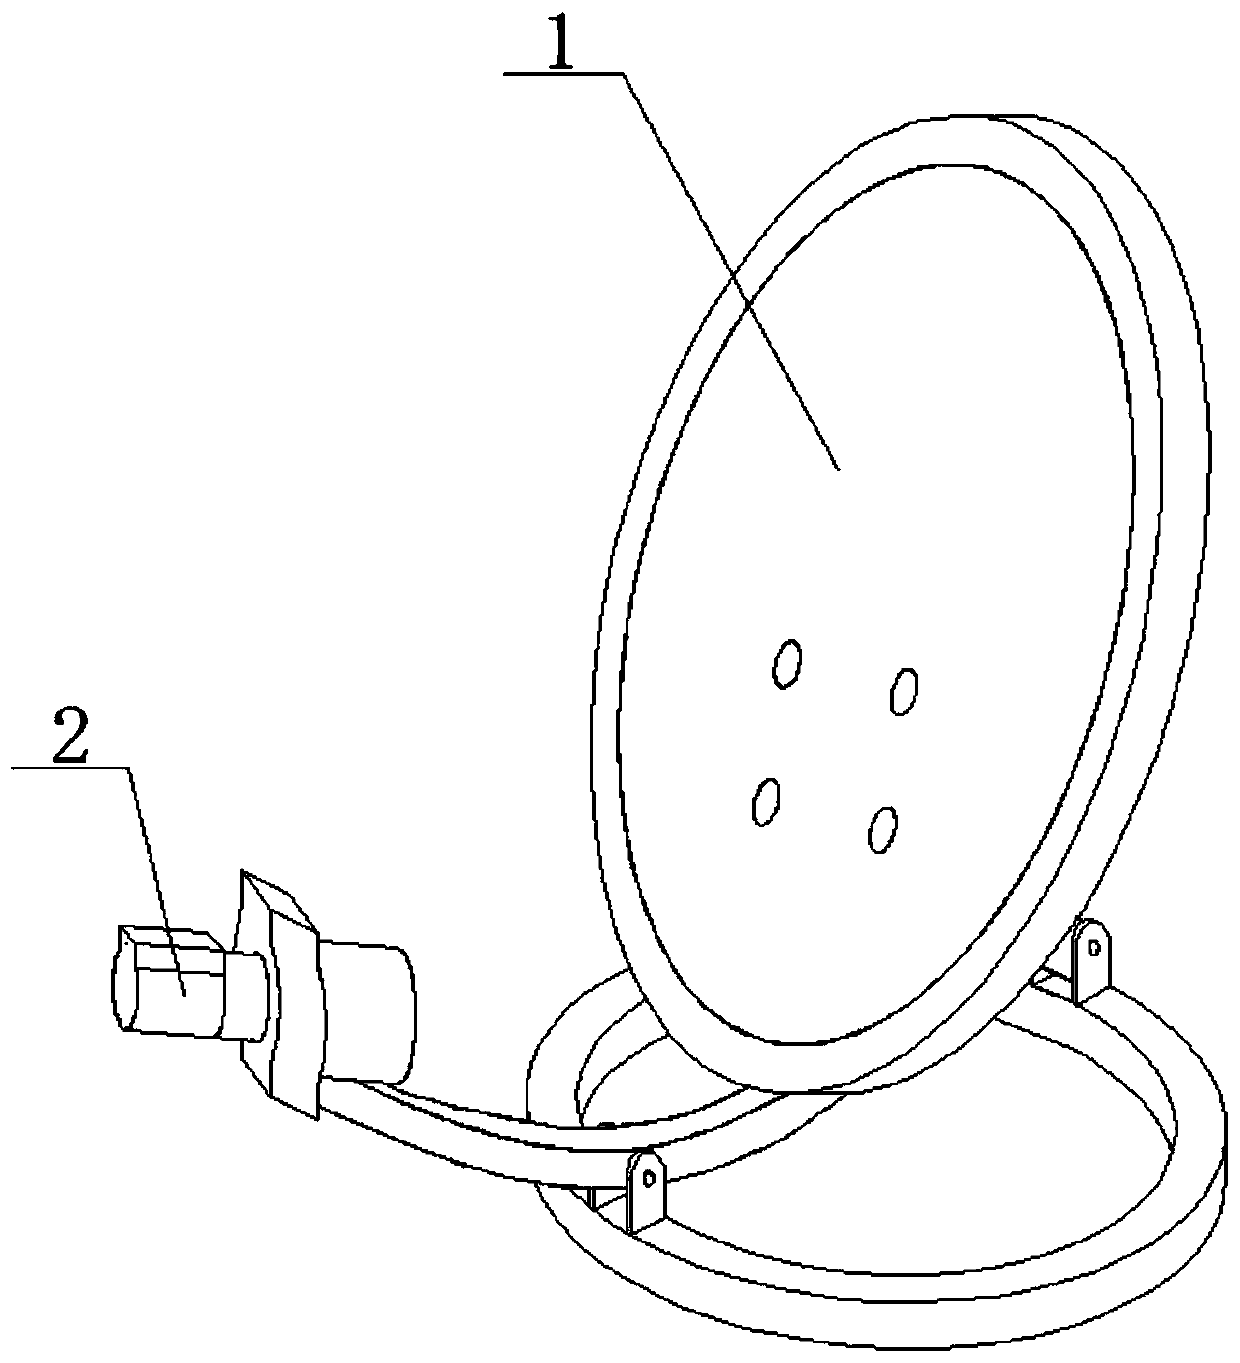 Antenna for receiving television signals